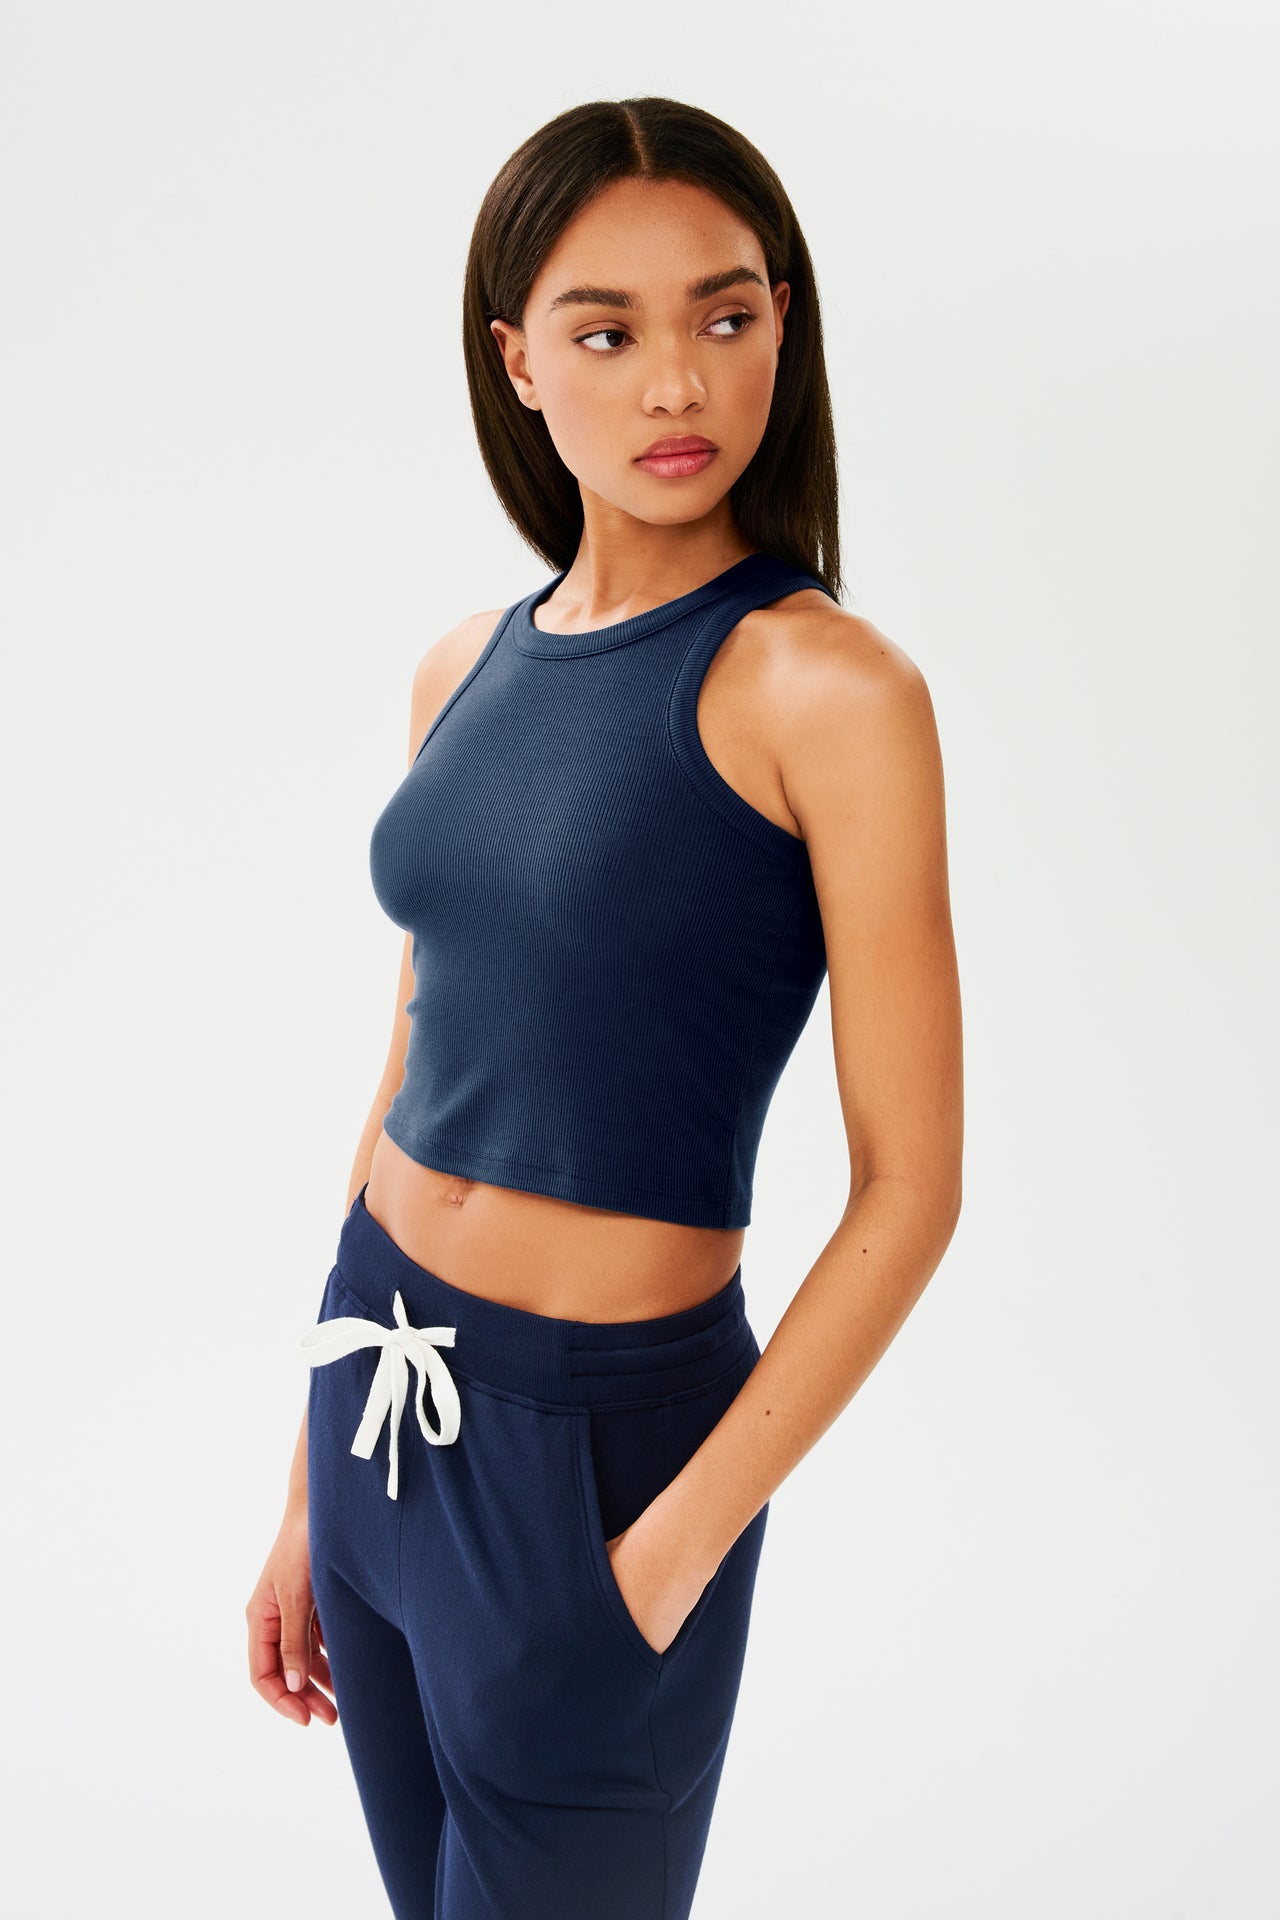 The model is wearing a Kiki Rib Crop Tank in Indigo and white sweatpants ideal for gym workouts by SPLITS59.